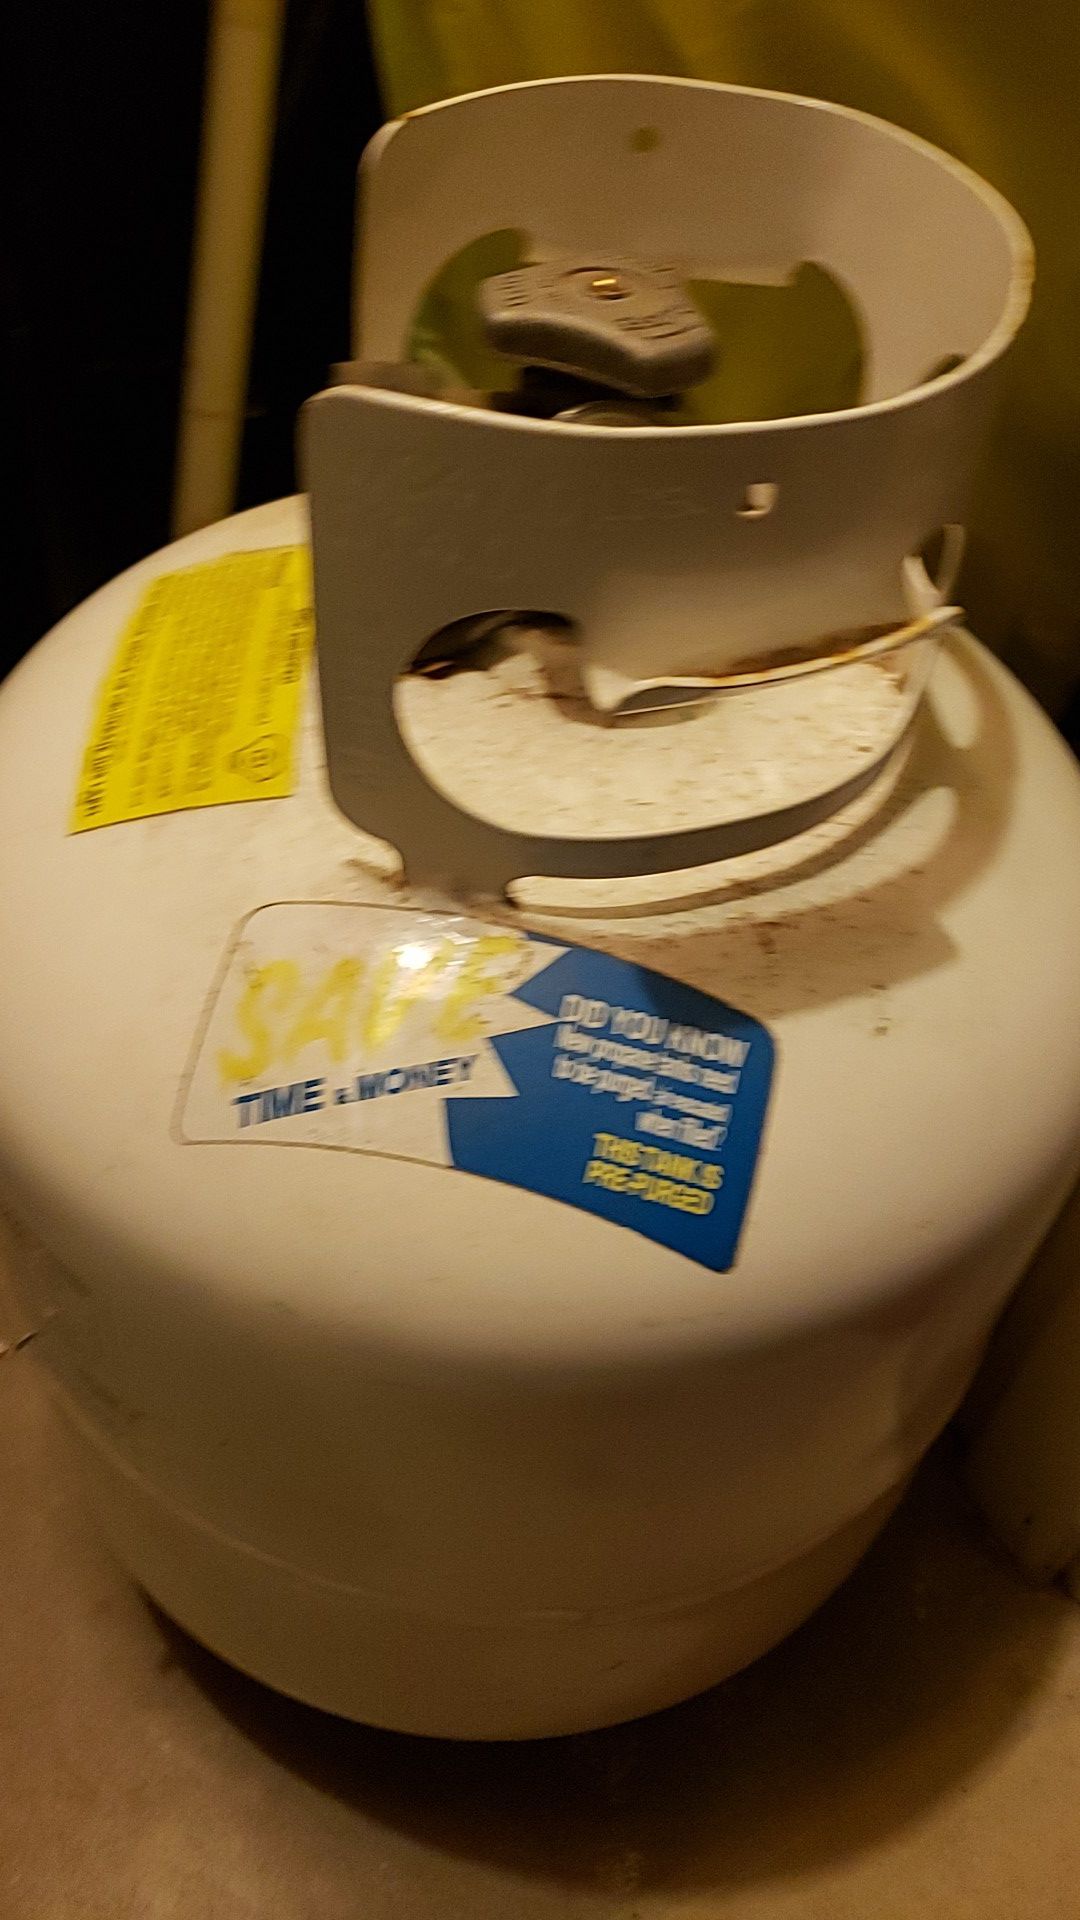 Propane tank $10 will not respond to $5 Offers